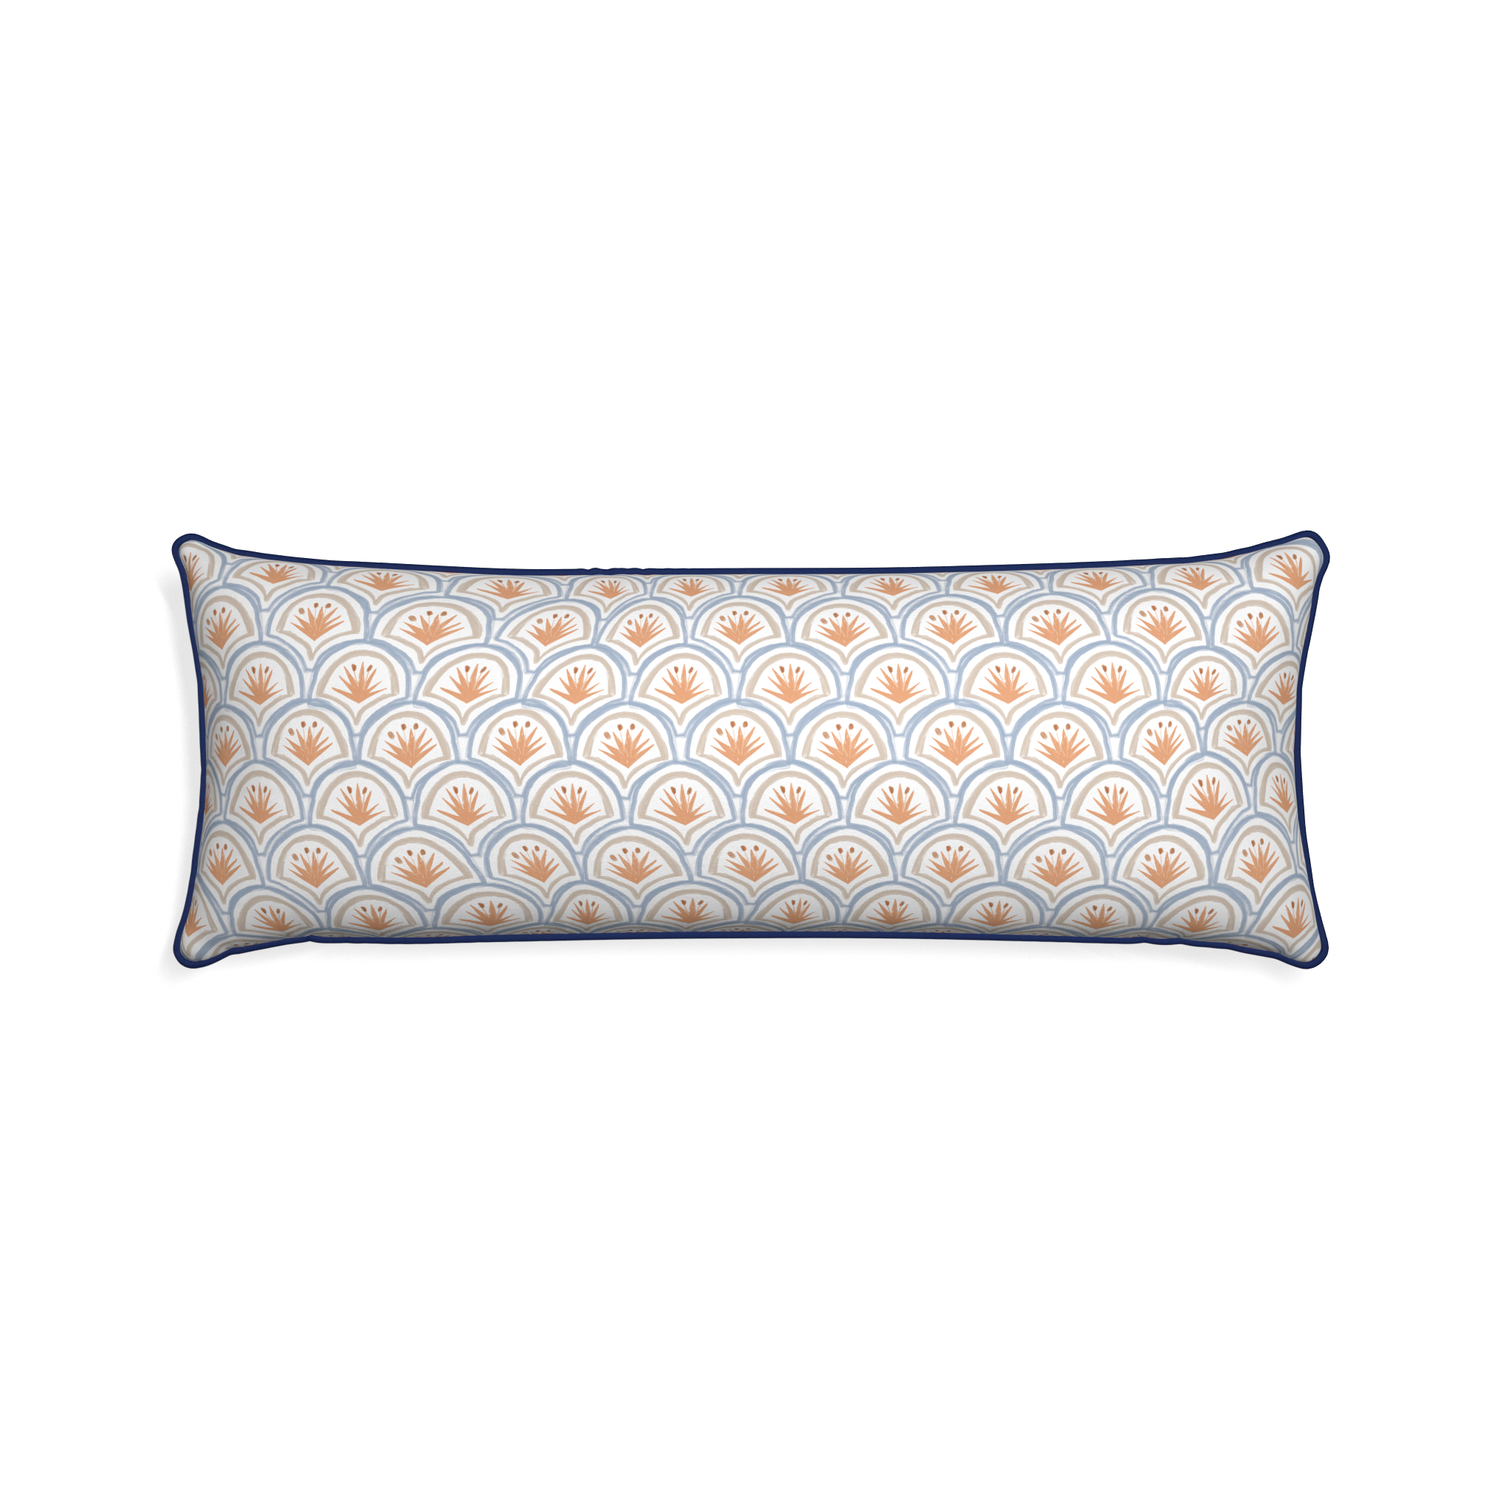 Xl-lumbar thatcher apricot custom art deco palm patternpillow with midnight piping on white background